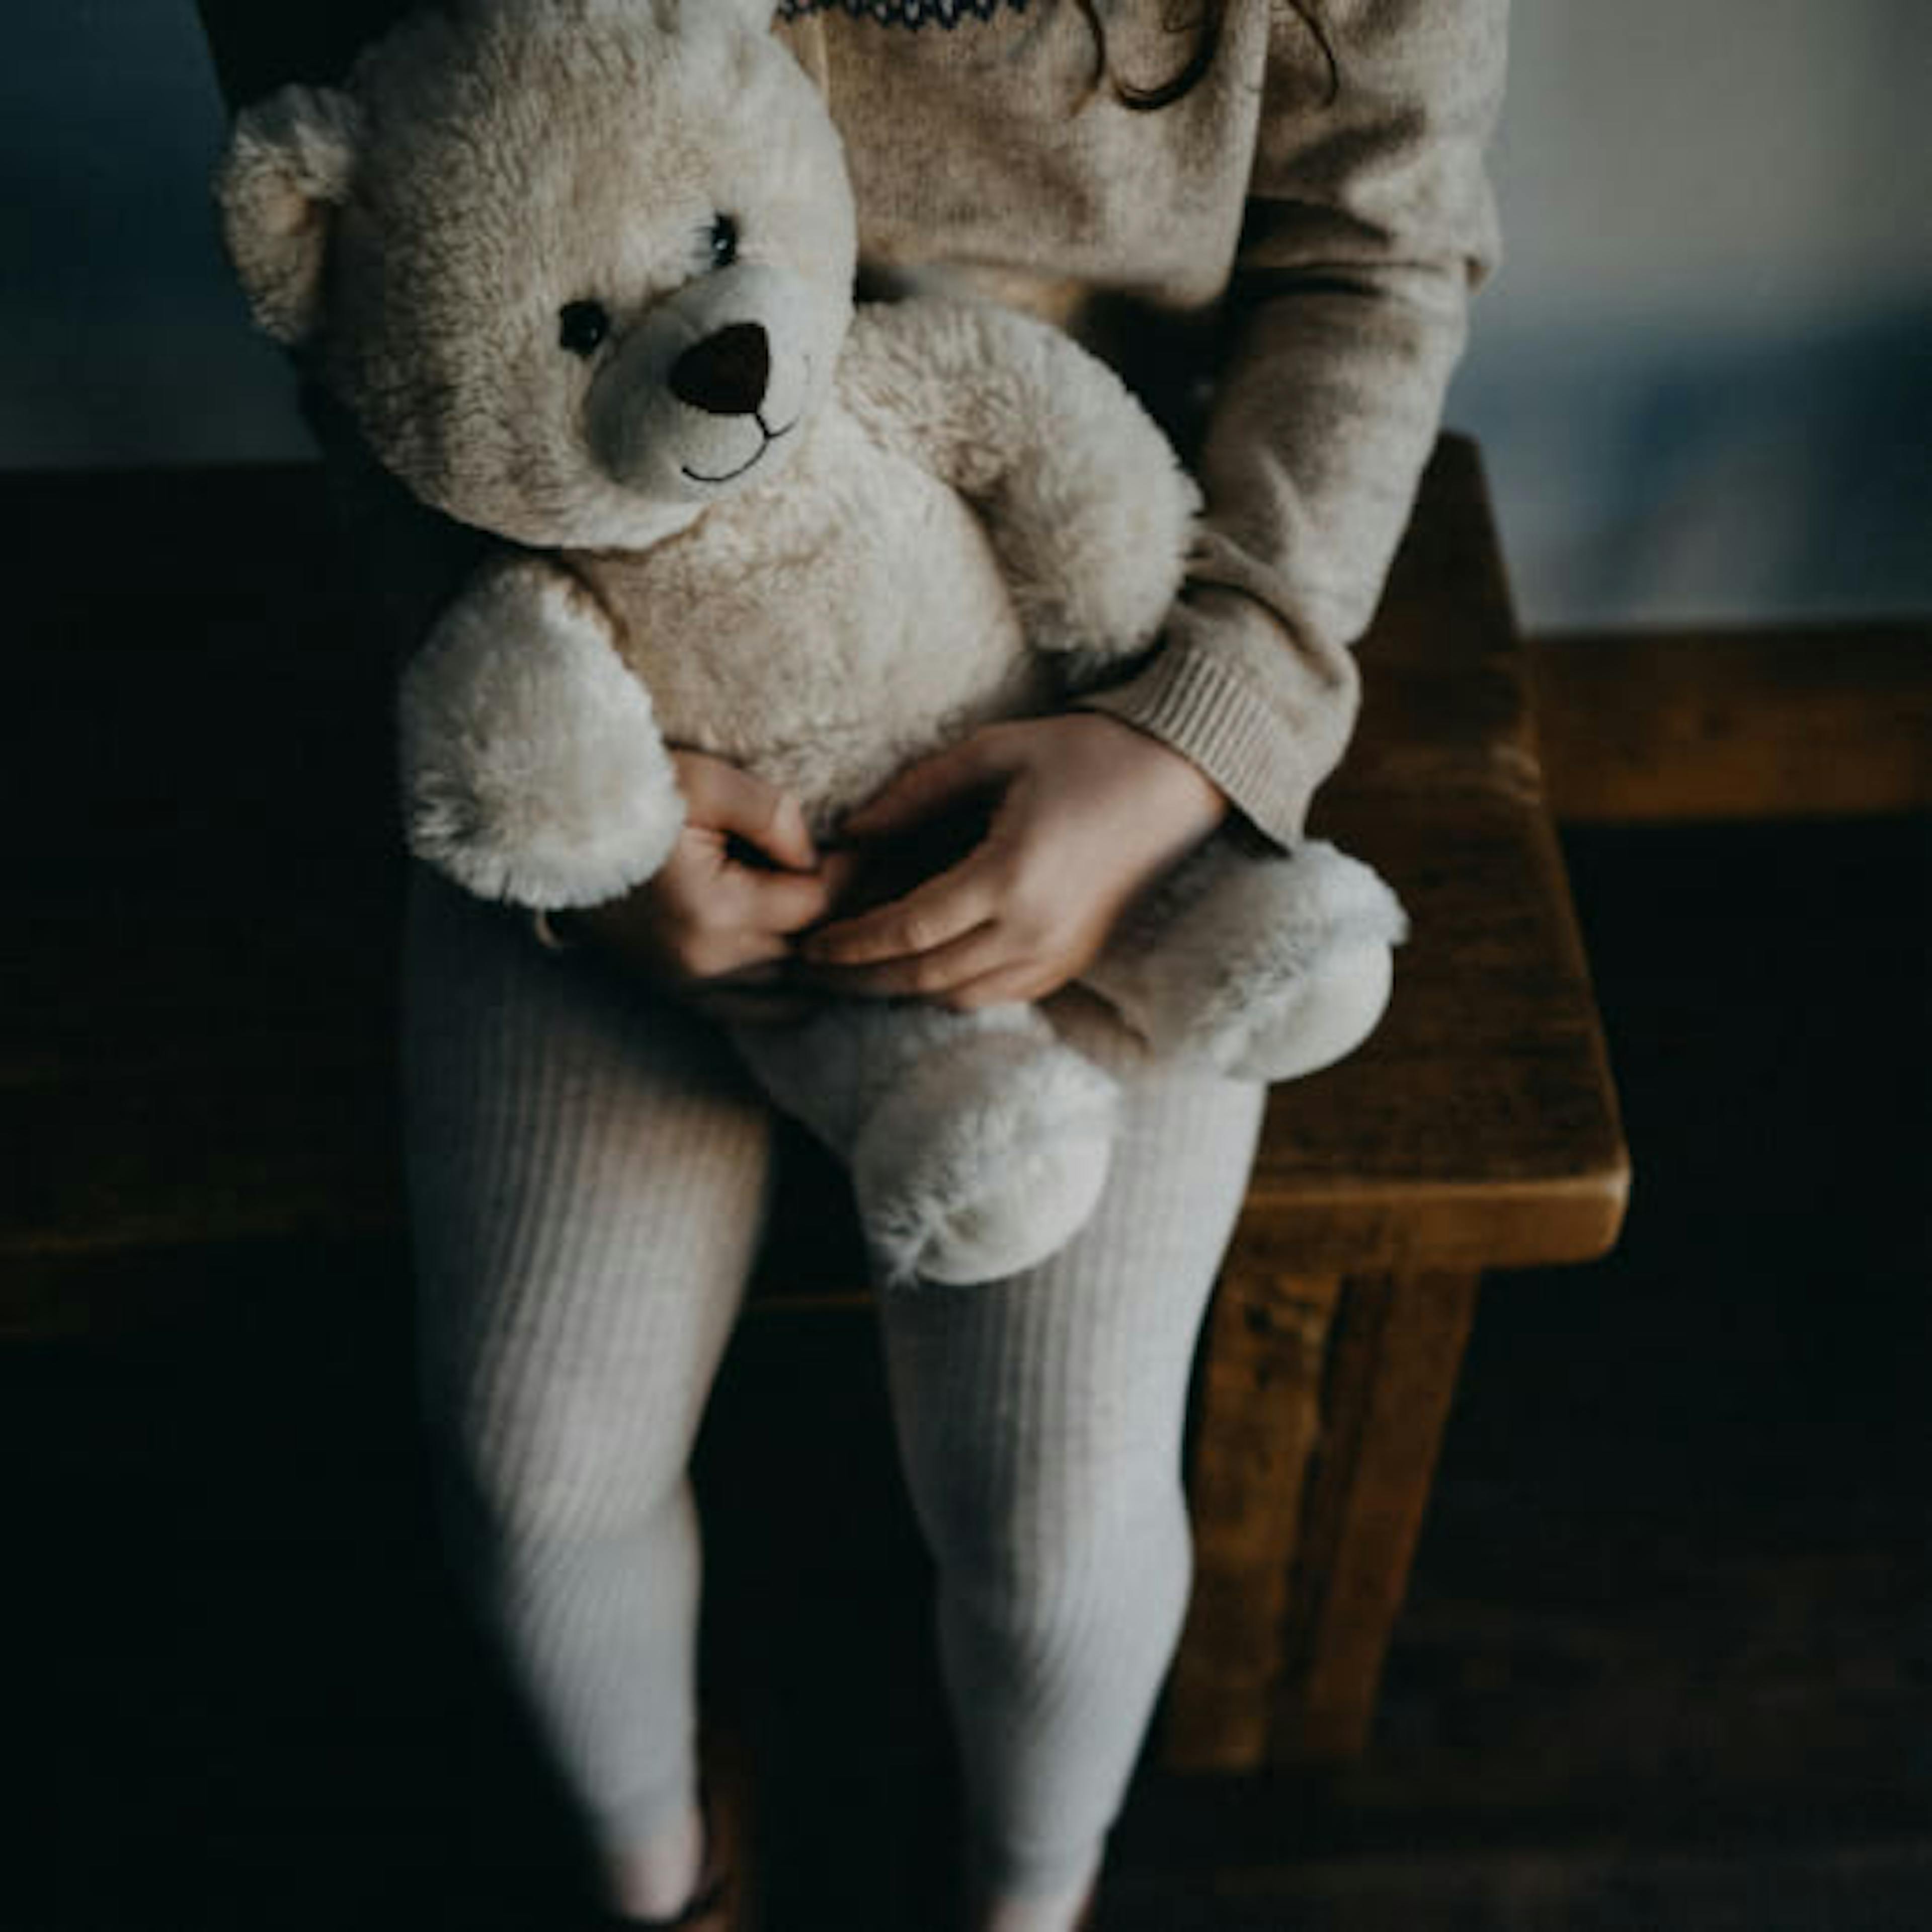 A little girl waits with her teddy bear for her mother to pay attention to her.